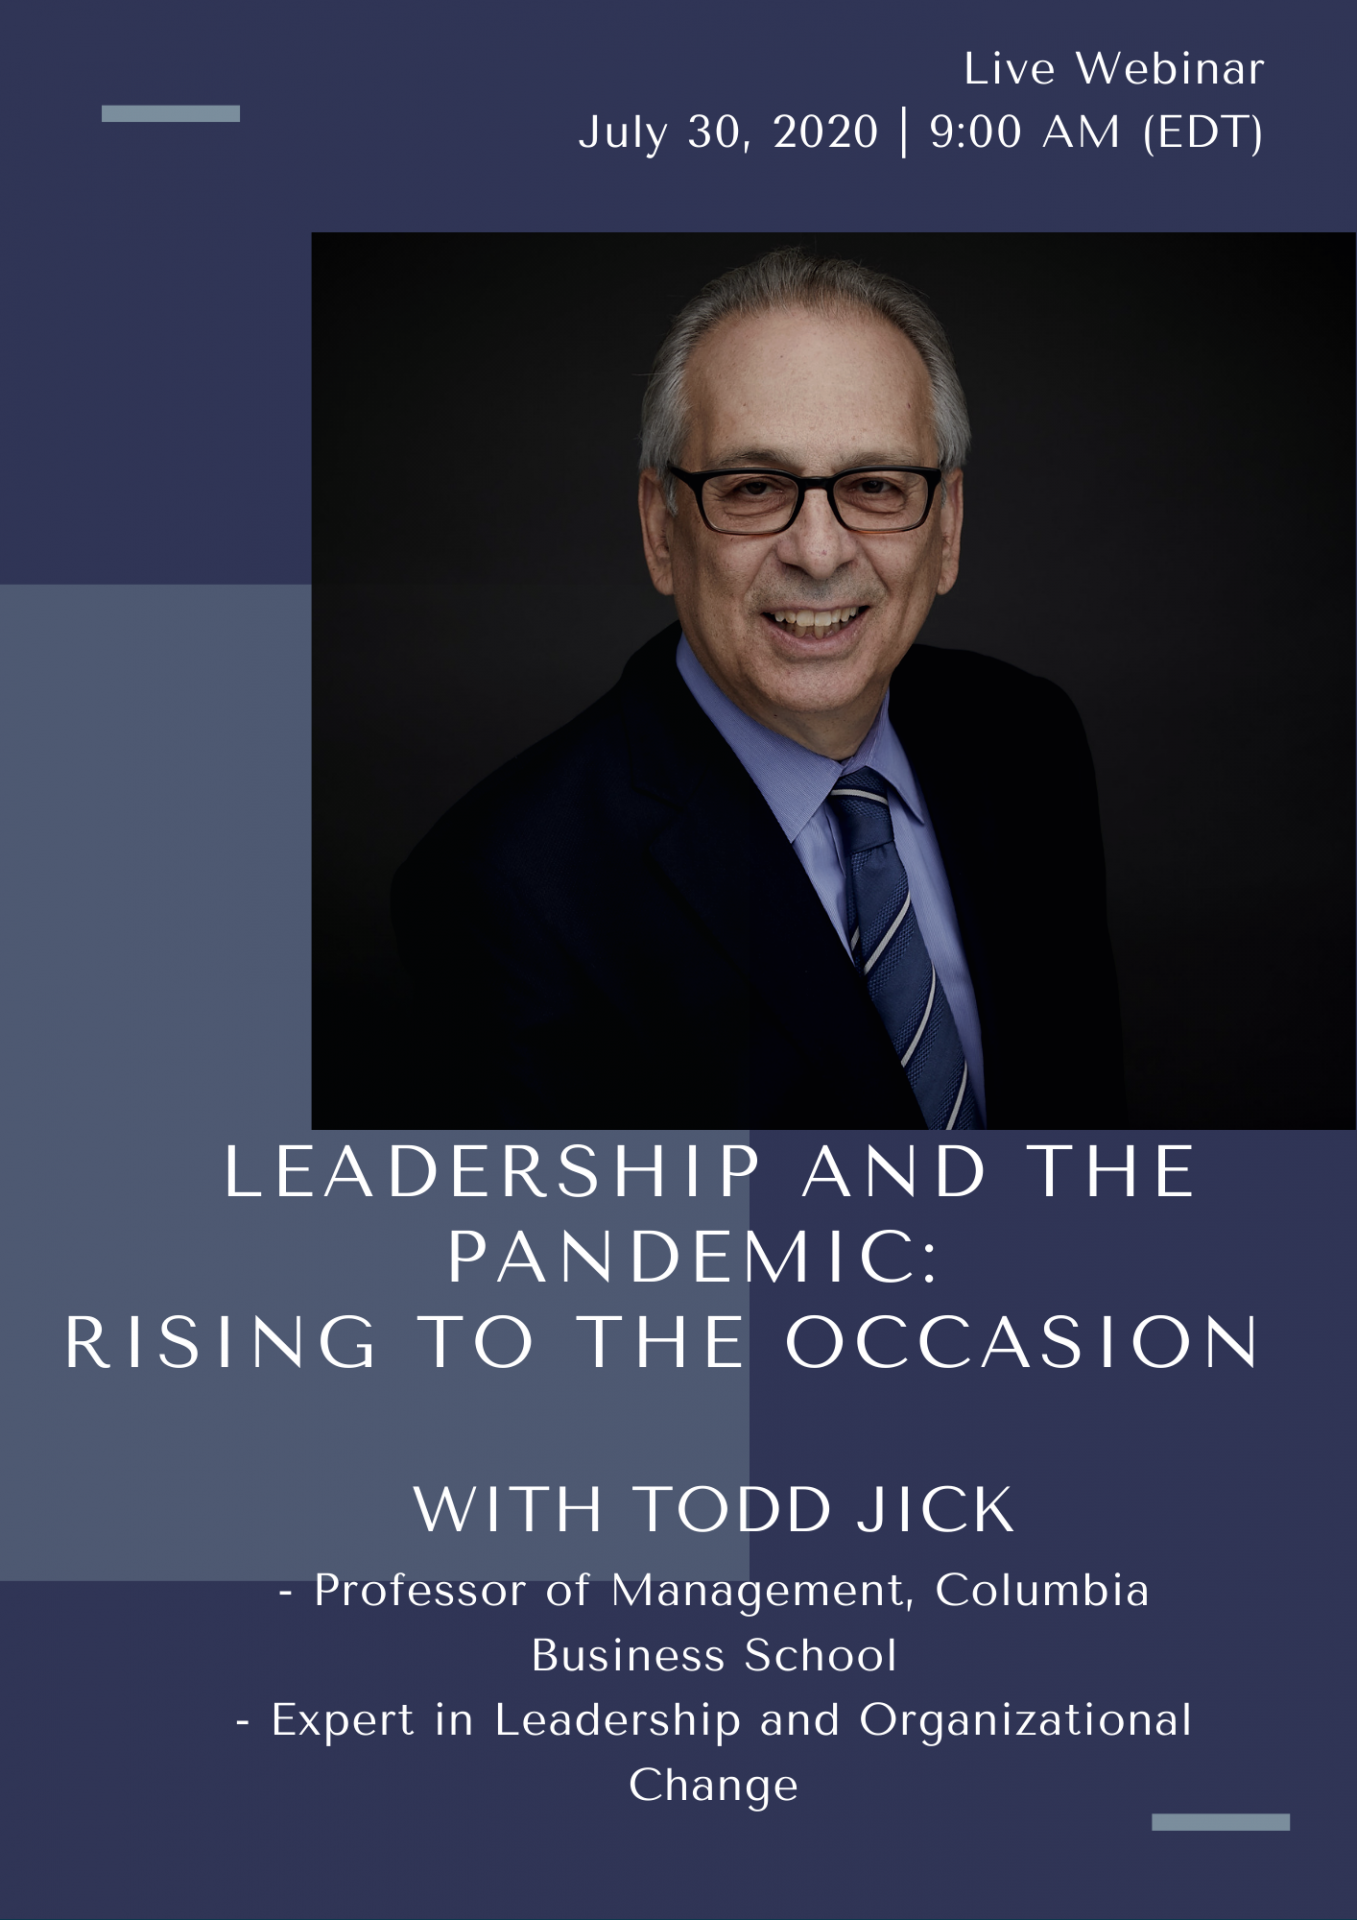 Leadership and the Pandemic - Rising to the Occasion, with Todd Jick